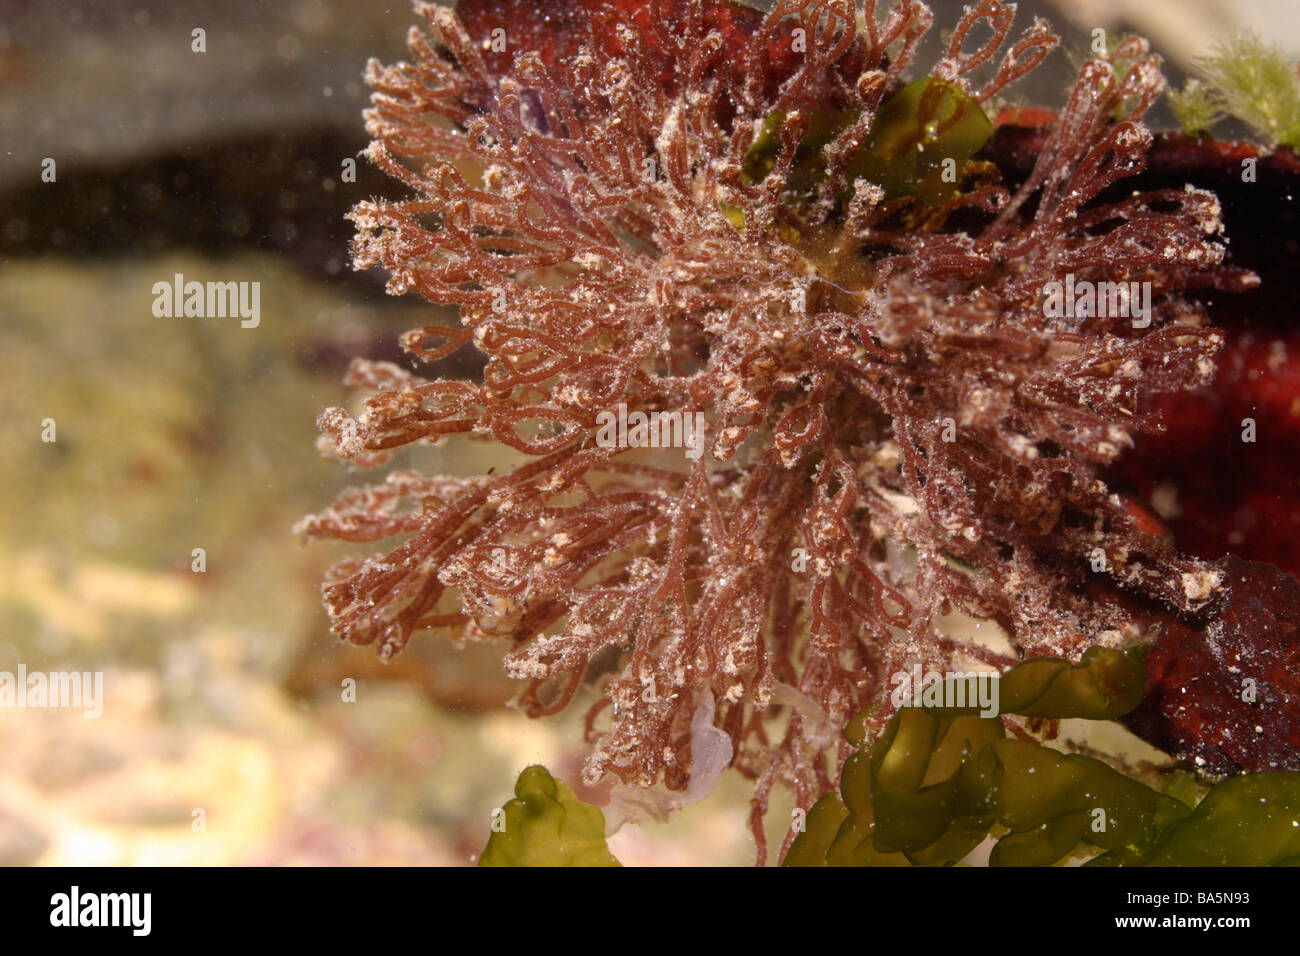 A red seaweed Ceramium echionotum epiphytic on another red seaweed UK Stock Photo